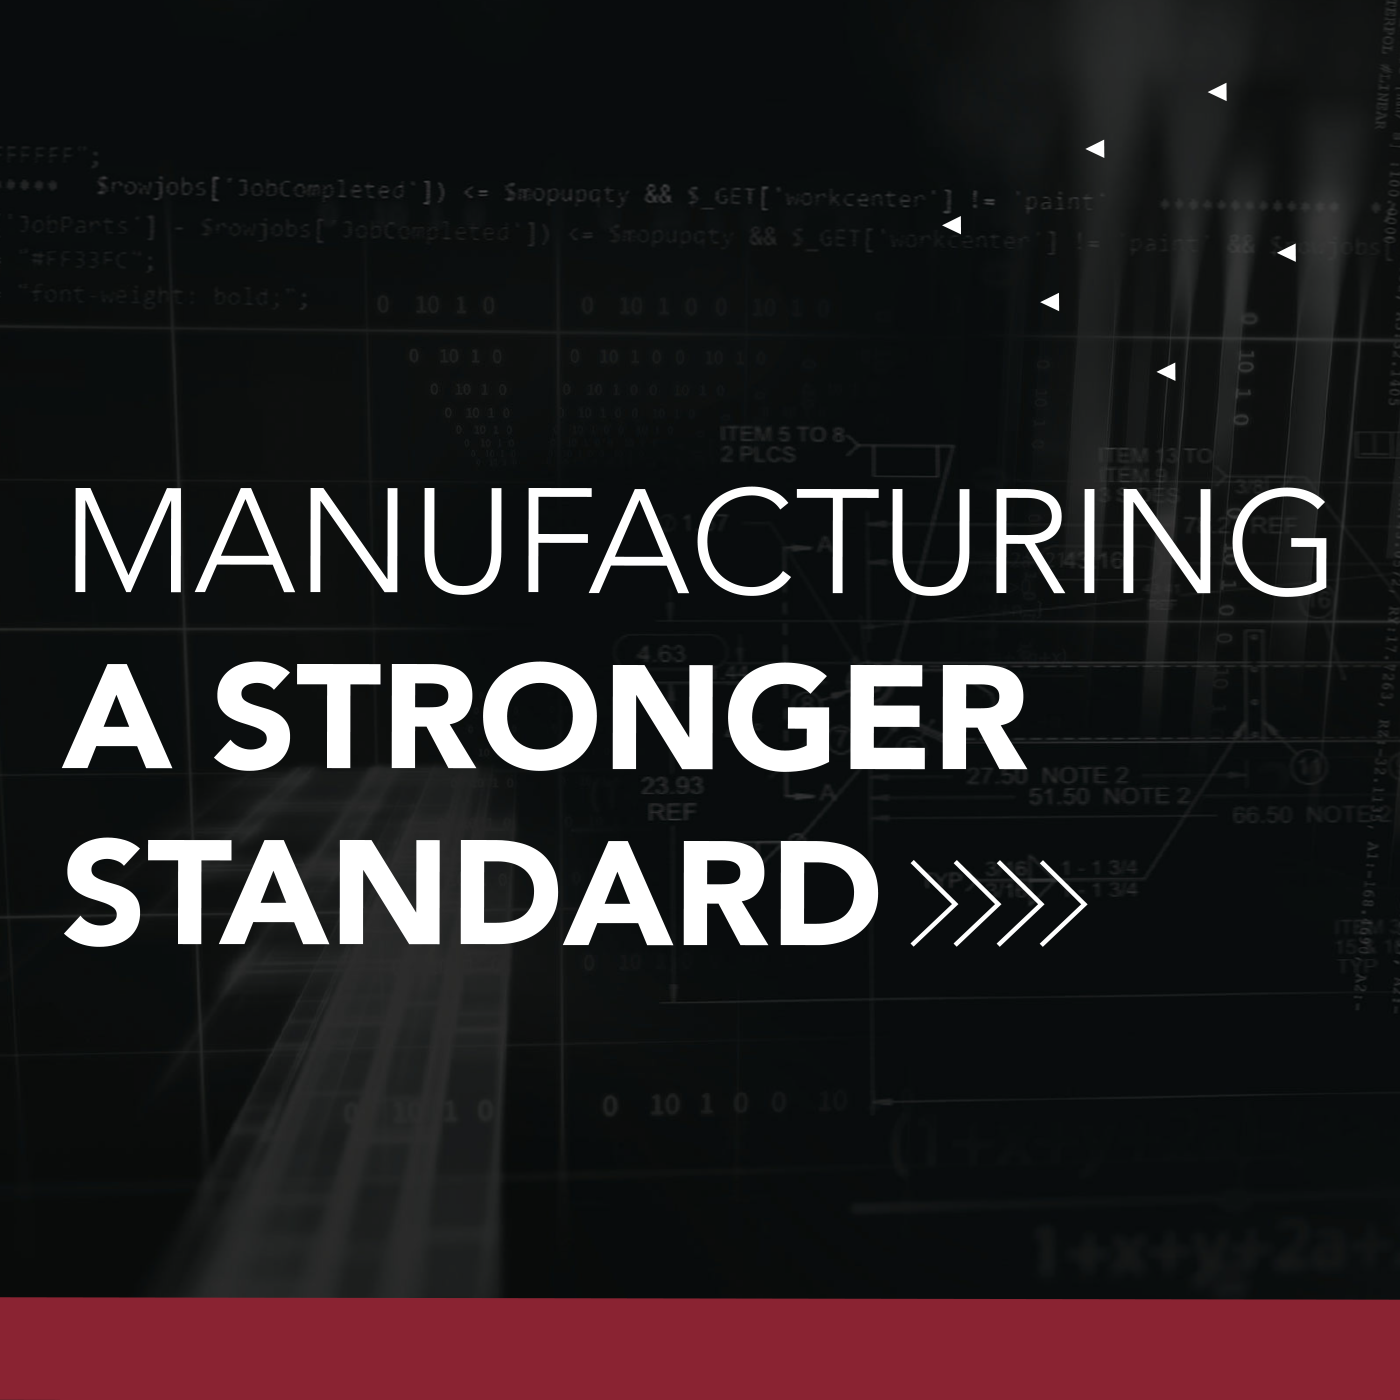 Manufacturing a Stronger Standard